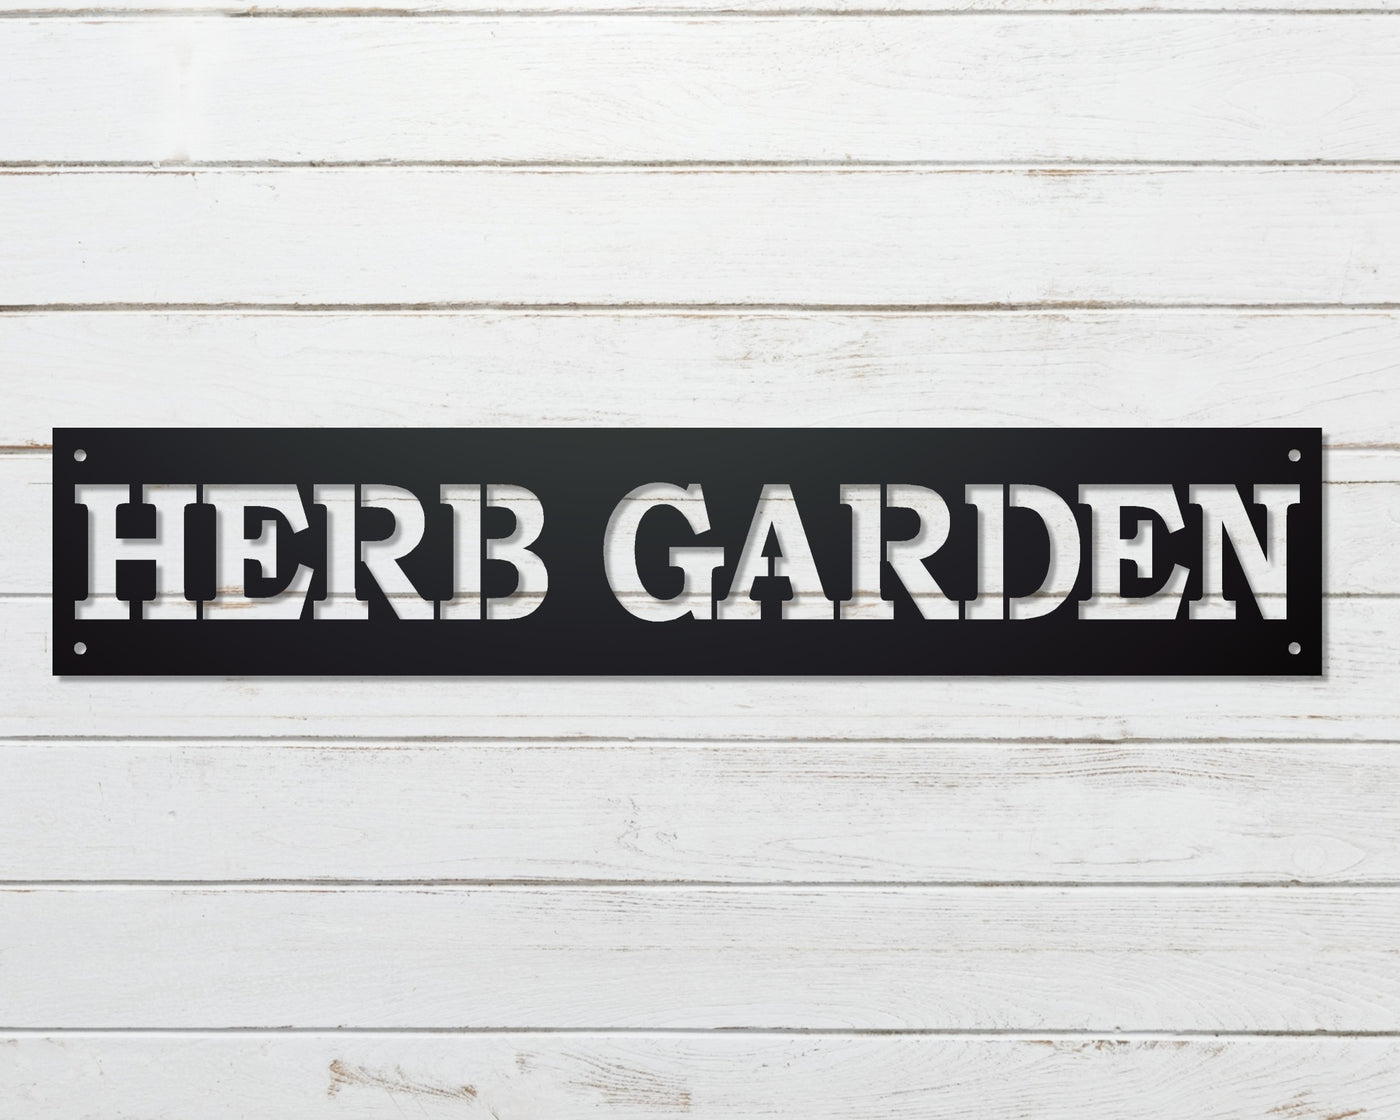 Herb Garden Metal Word Sign - Madison Iron and Wood - Metal Art - metal outdoor decor - Steel deocrations - american made products - veteran owned business products - fencing decorations - fencing supplies - custom wall decorations - personalized wall signs - steel - decorative post caps - steel post caps - metal post caps - brackets - structural brackets - home improvement - easter - easter decorations - easter gift - easter yard decor